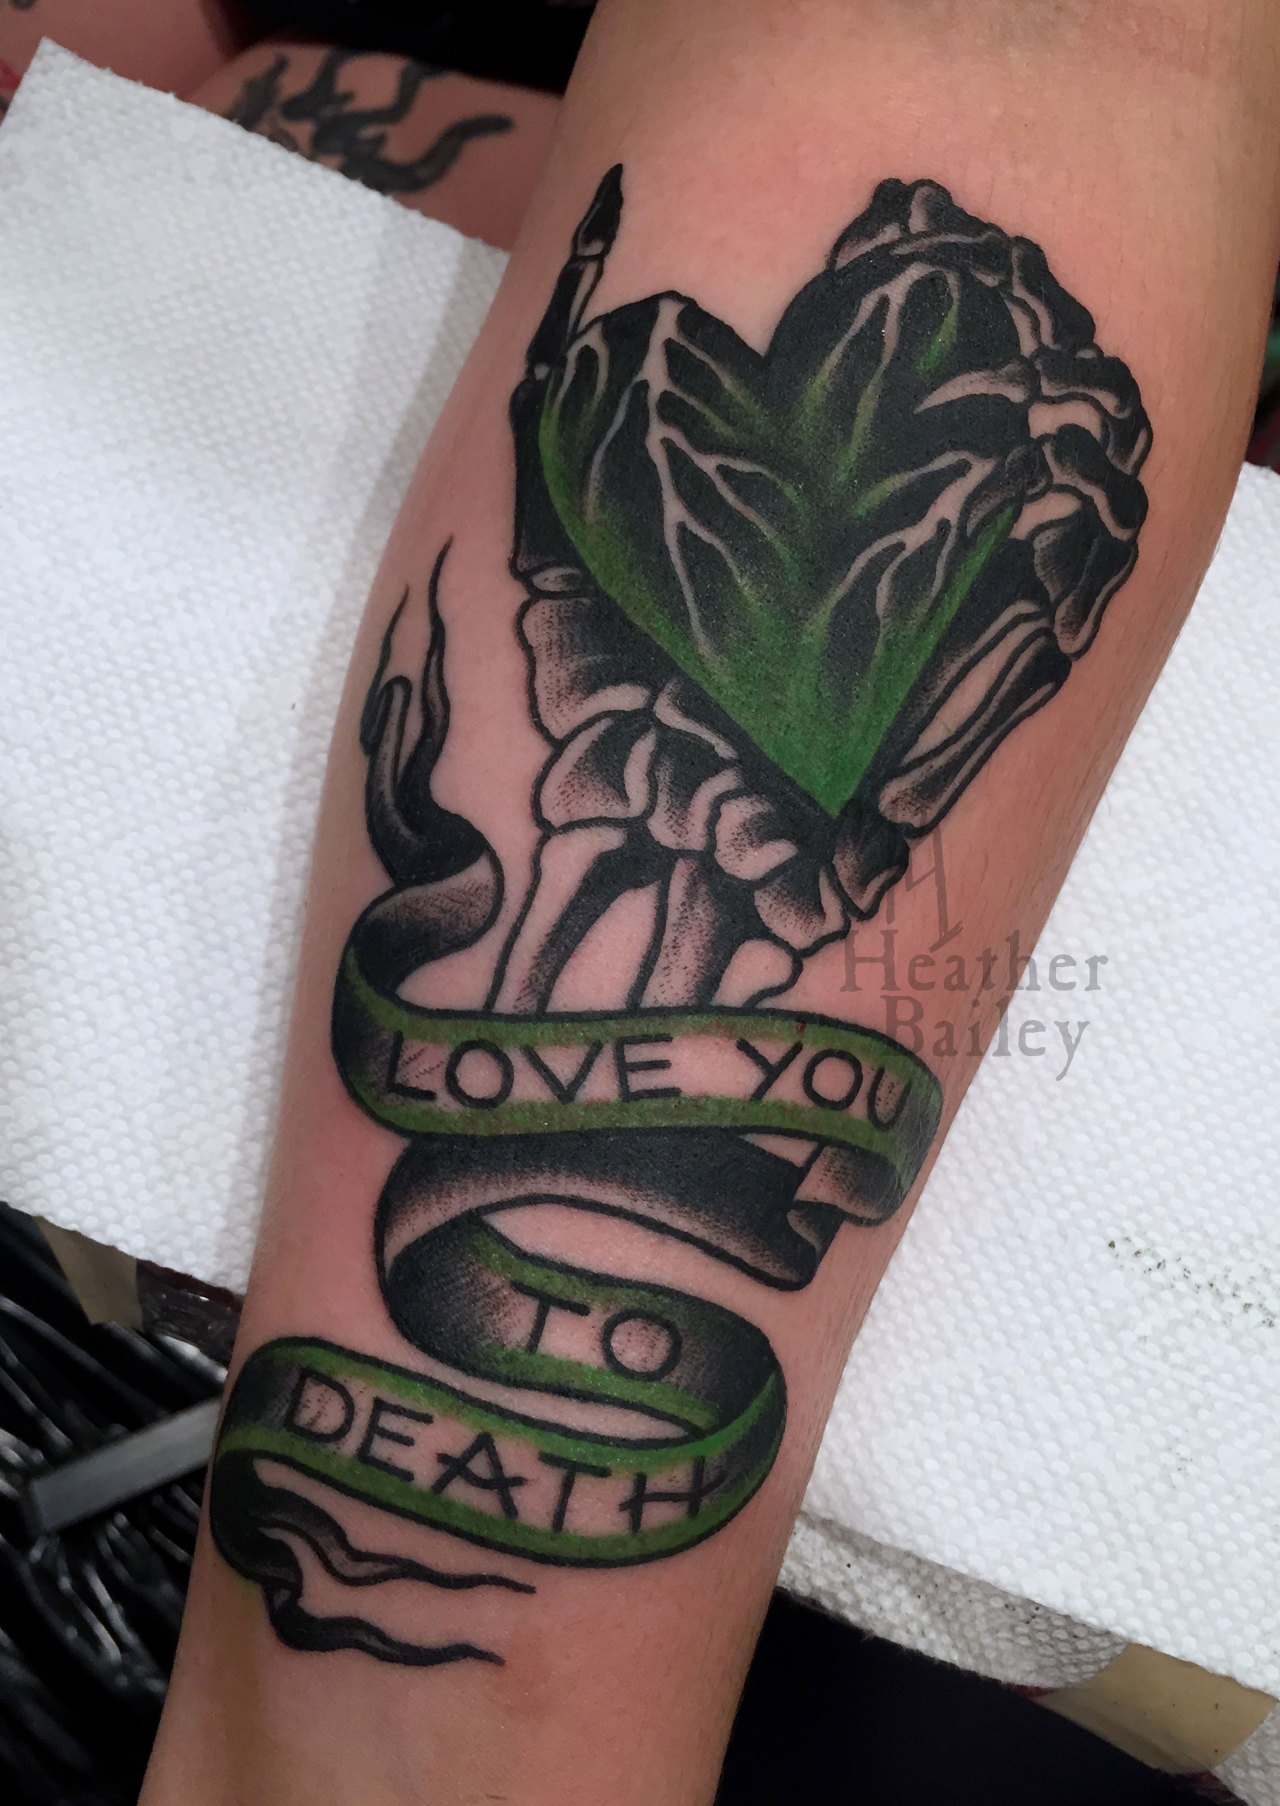 Type O Negative Tattoo  This is my tribute tat Love you t  Flickr